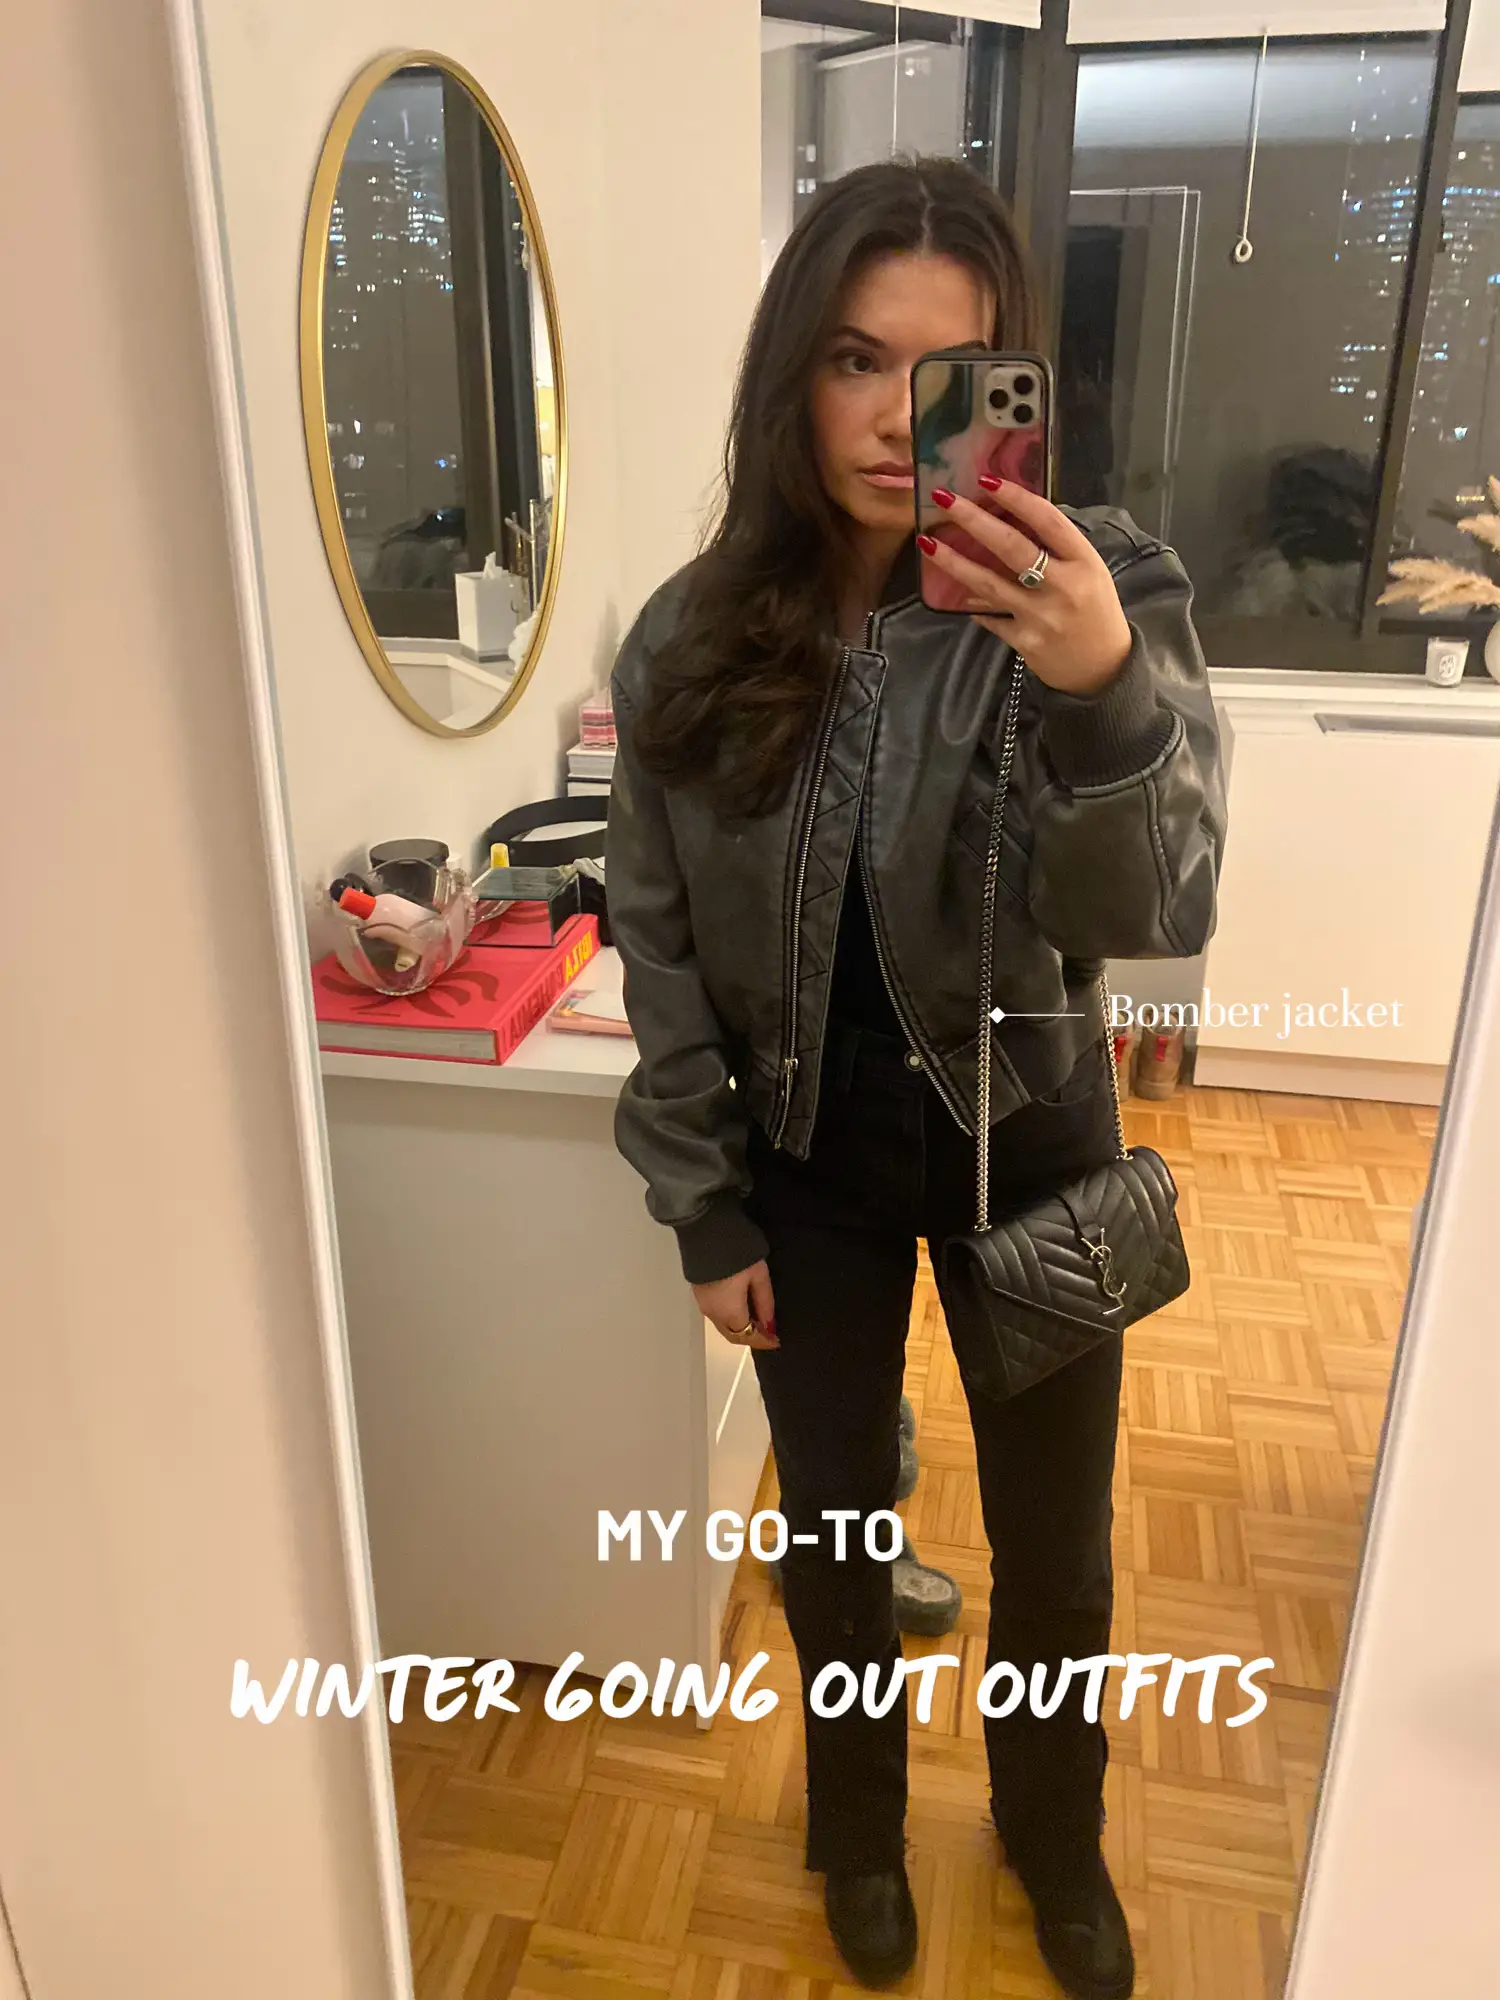 Winter going out outfits, Gallery posted by Ashley Weiner